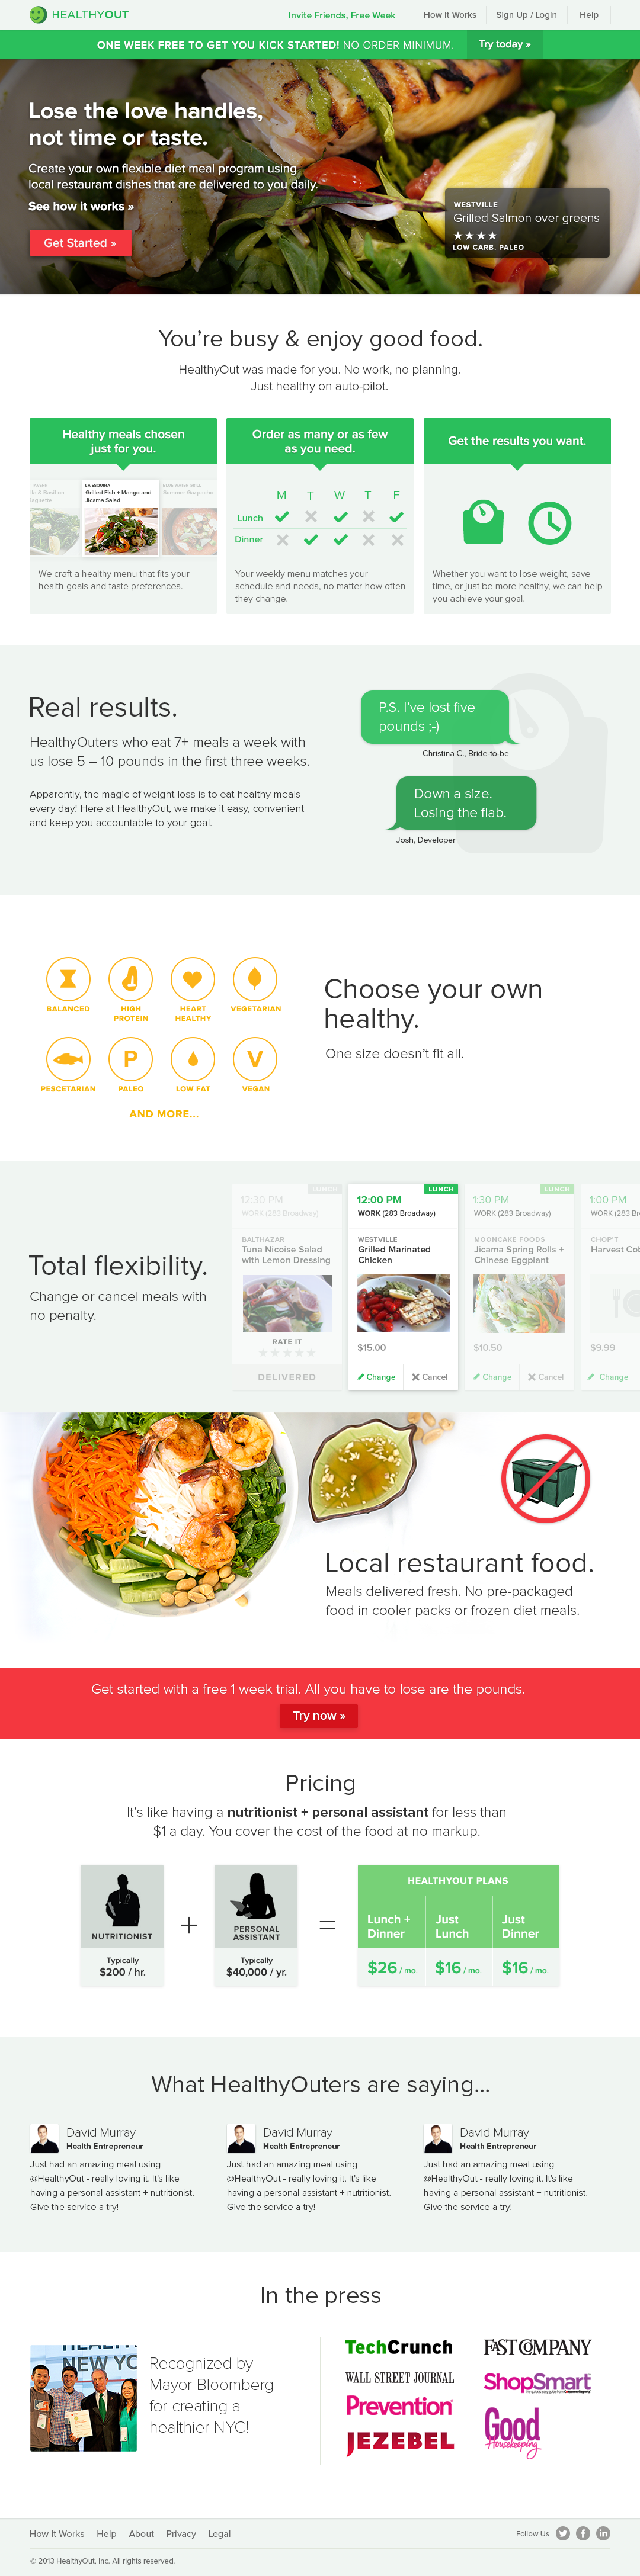 HealthyOut Homepage